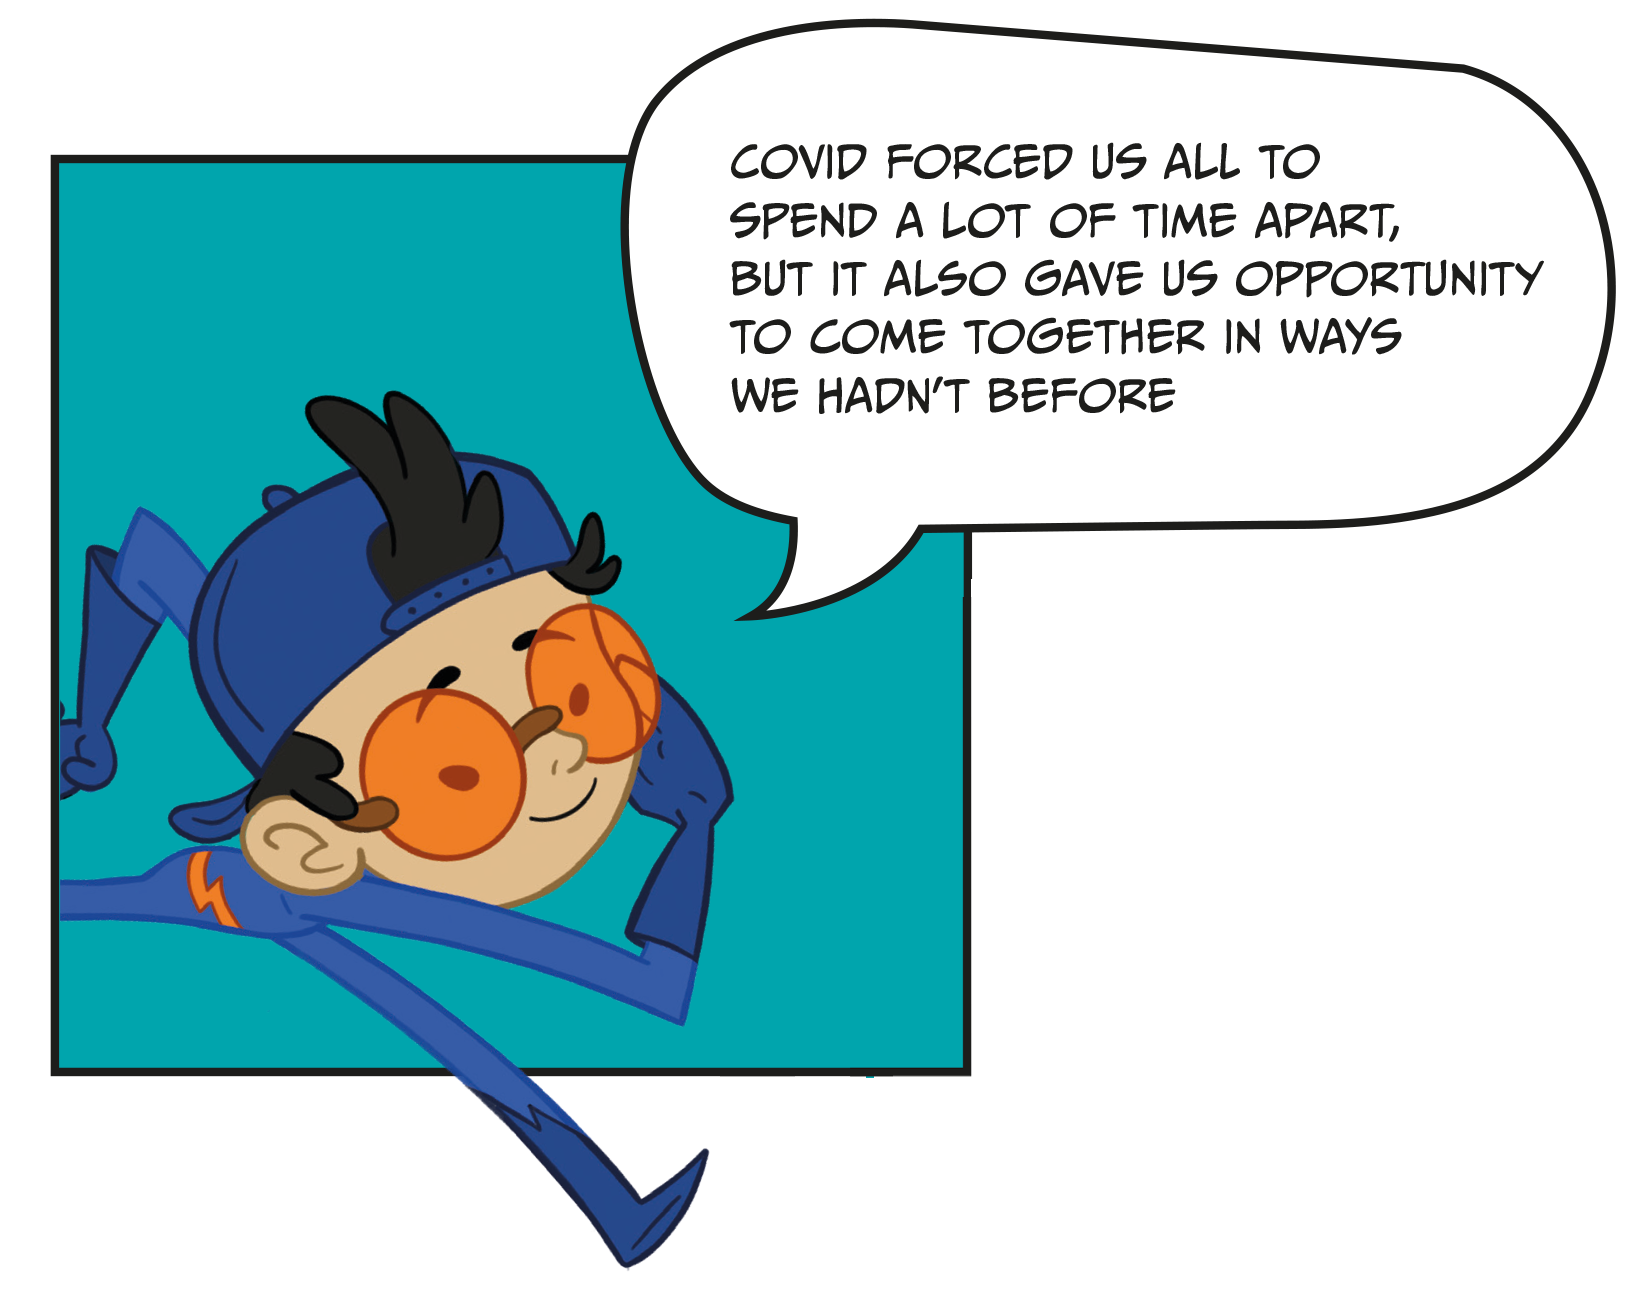 Image with text. Cartoon drawing of a superhero character saying "Covid forced us all to spend a lot of time apart, but it also gave us opportunity to come together in ways we hadn't before".